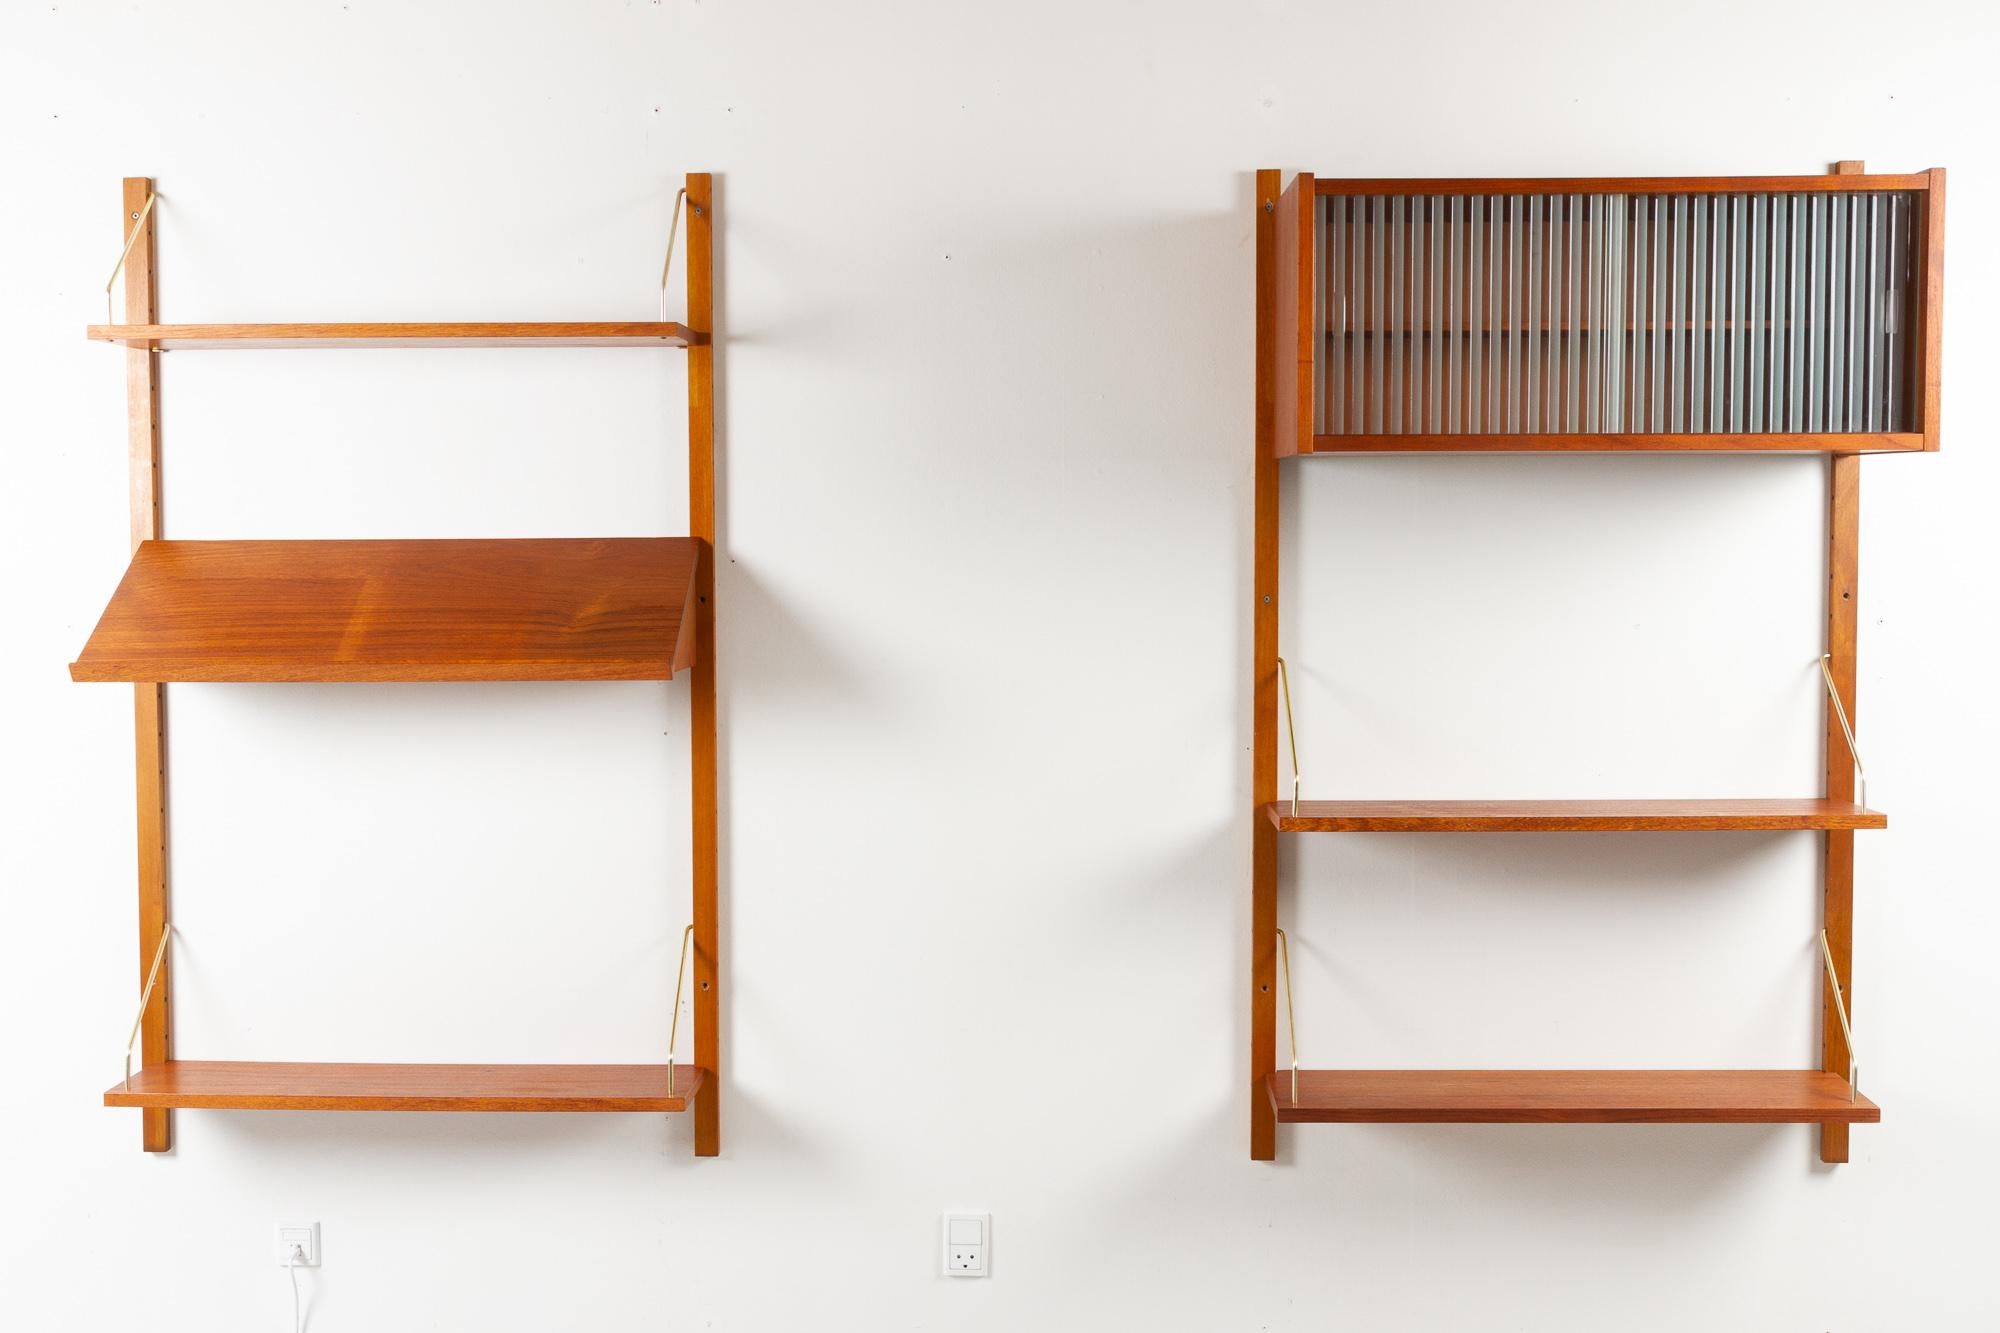 Vintage Danish teak modular wall unit 1960s
Danish Mid-century modern shelving system in teak with golden brackets. Cabinet and shelves can be placed as desired. This set can be used as one two bay system or as two individual units.

This set